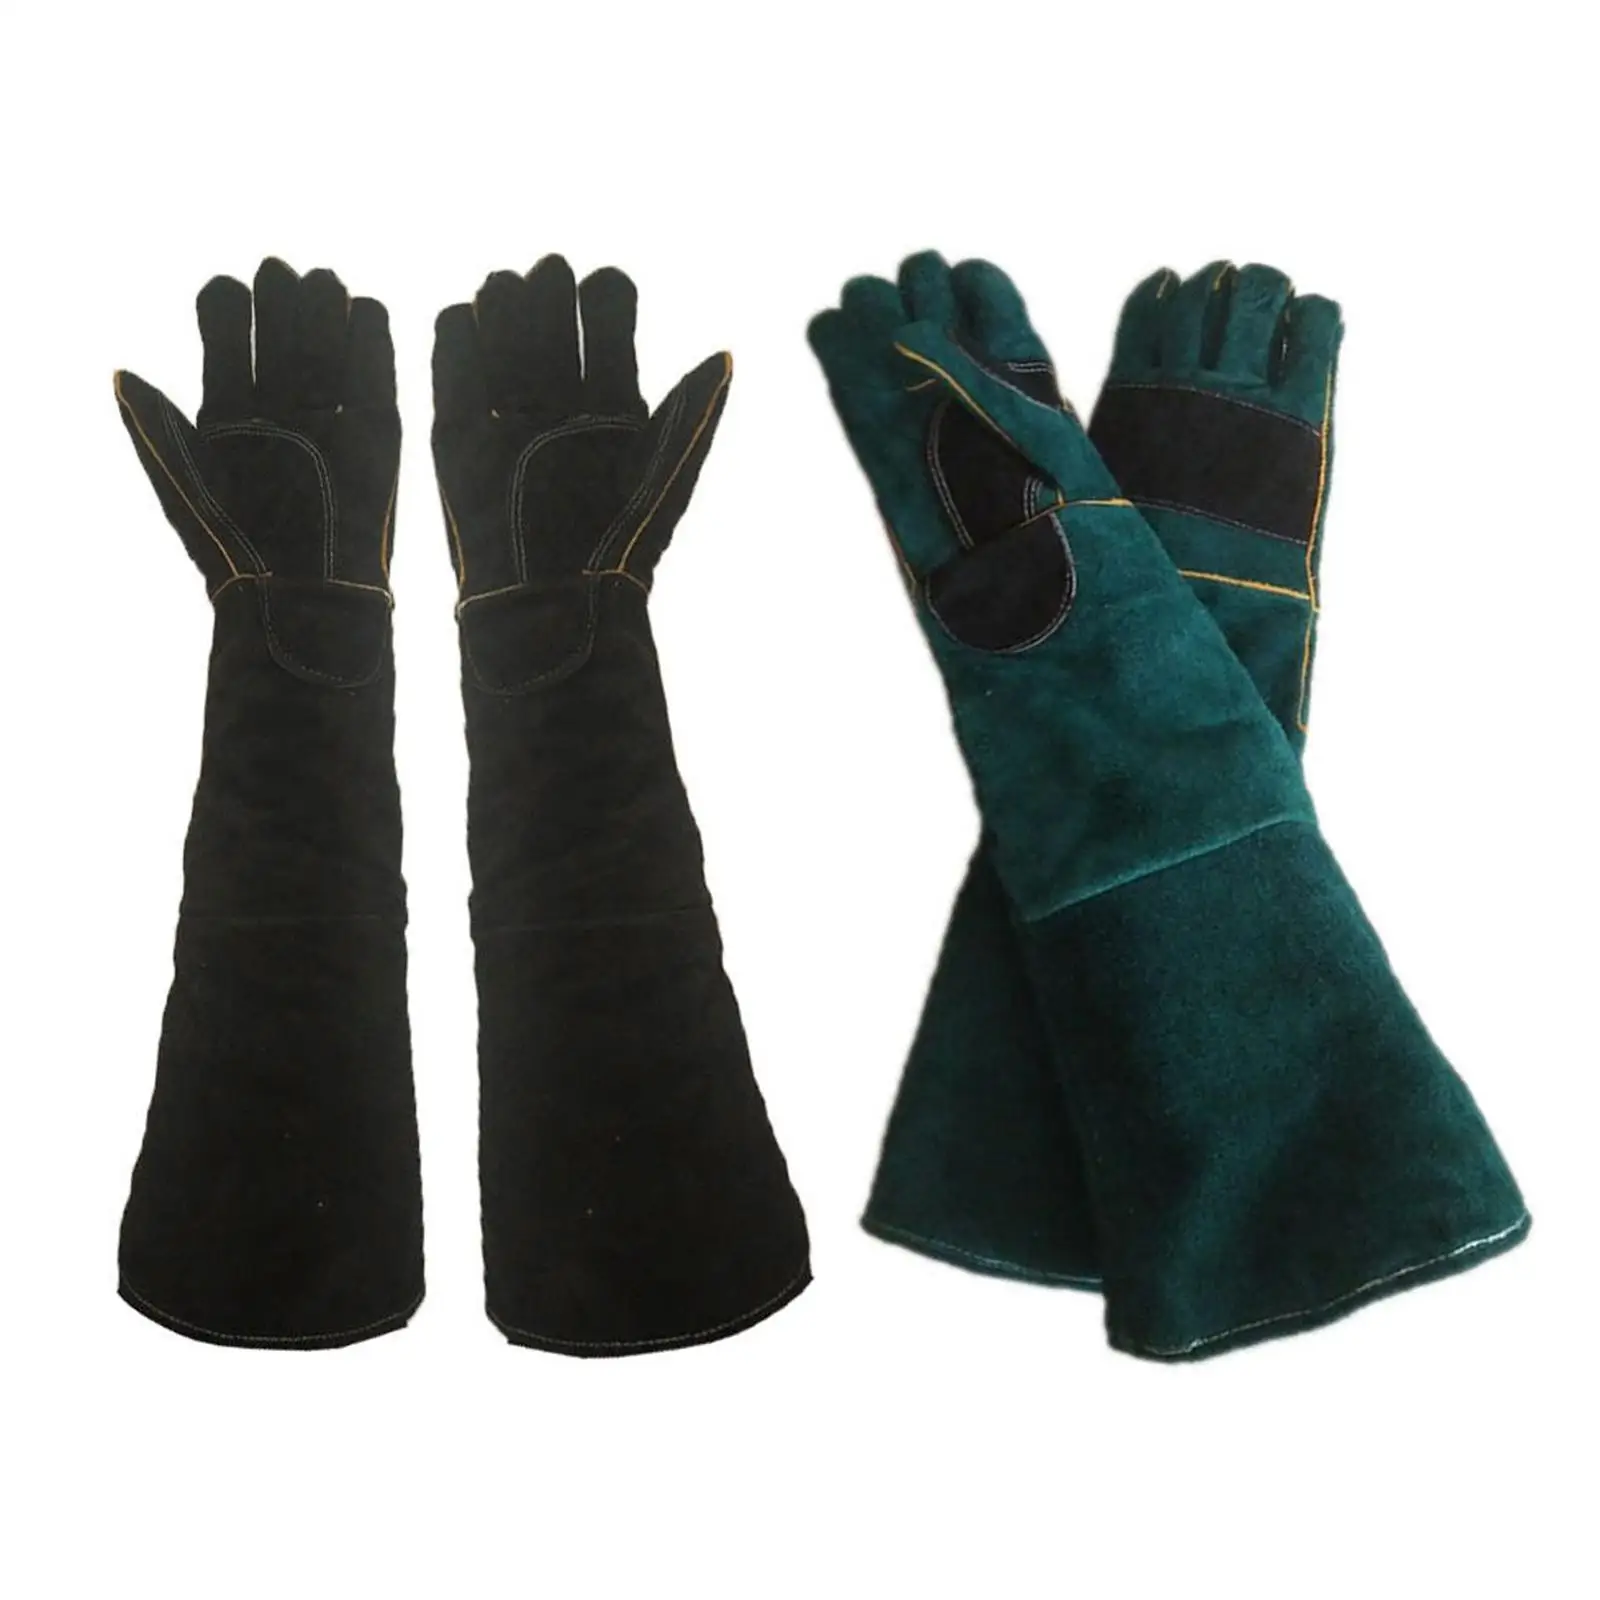 Animal Handling Gloves Bite Resistant Durable Dexterity Anti Bite Protective Gloves for Gardening Training Protection Zoo Staff